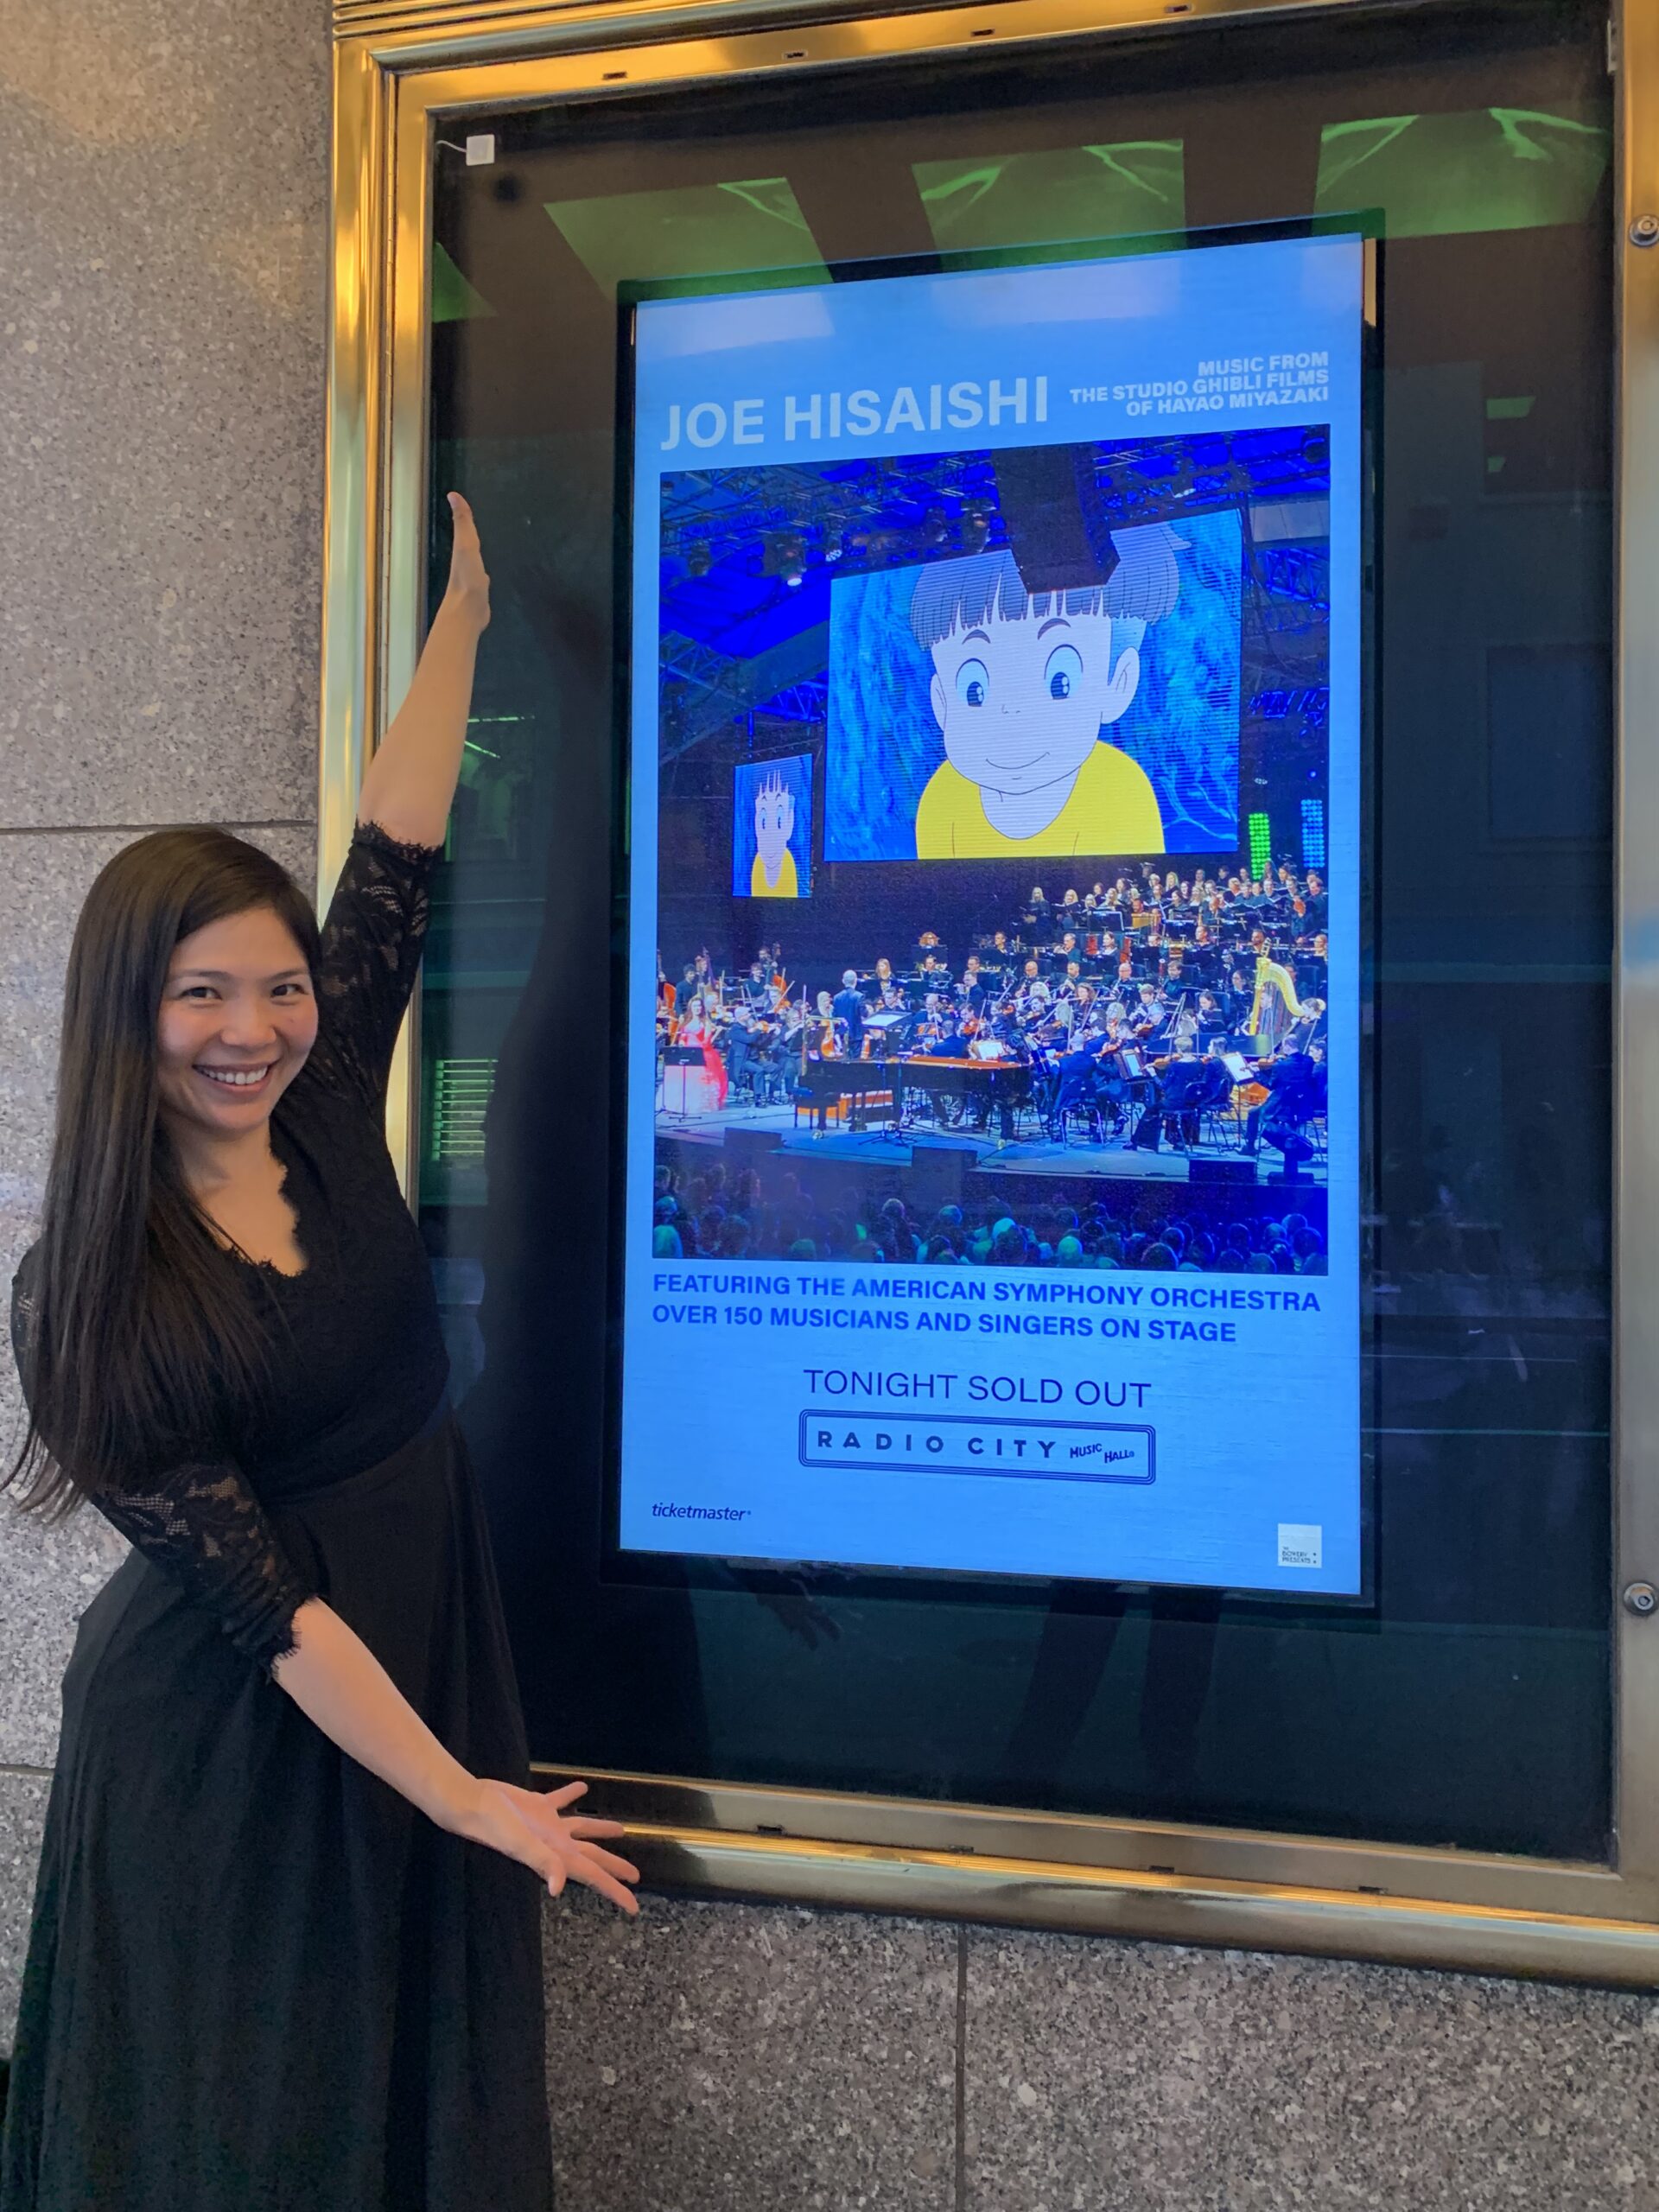 Image of the poster for the concert that reads Joe Hisaishi: Music from the Studio Ghibli Films of Hayao Miyazaki